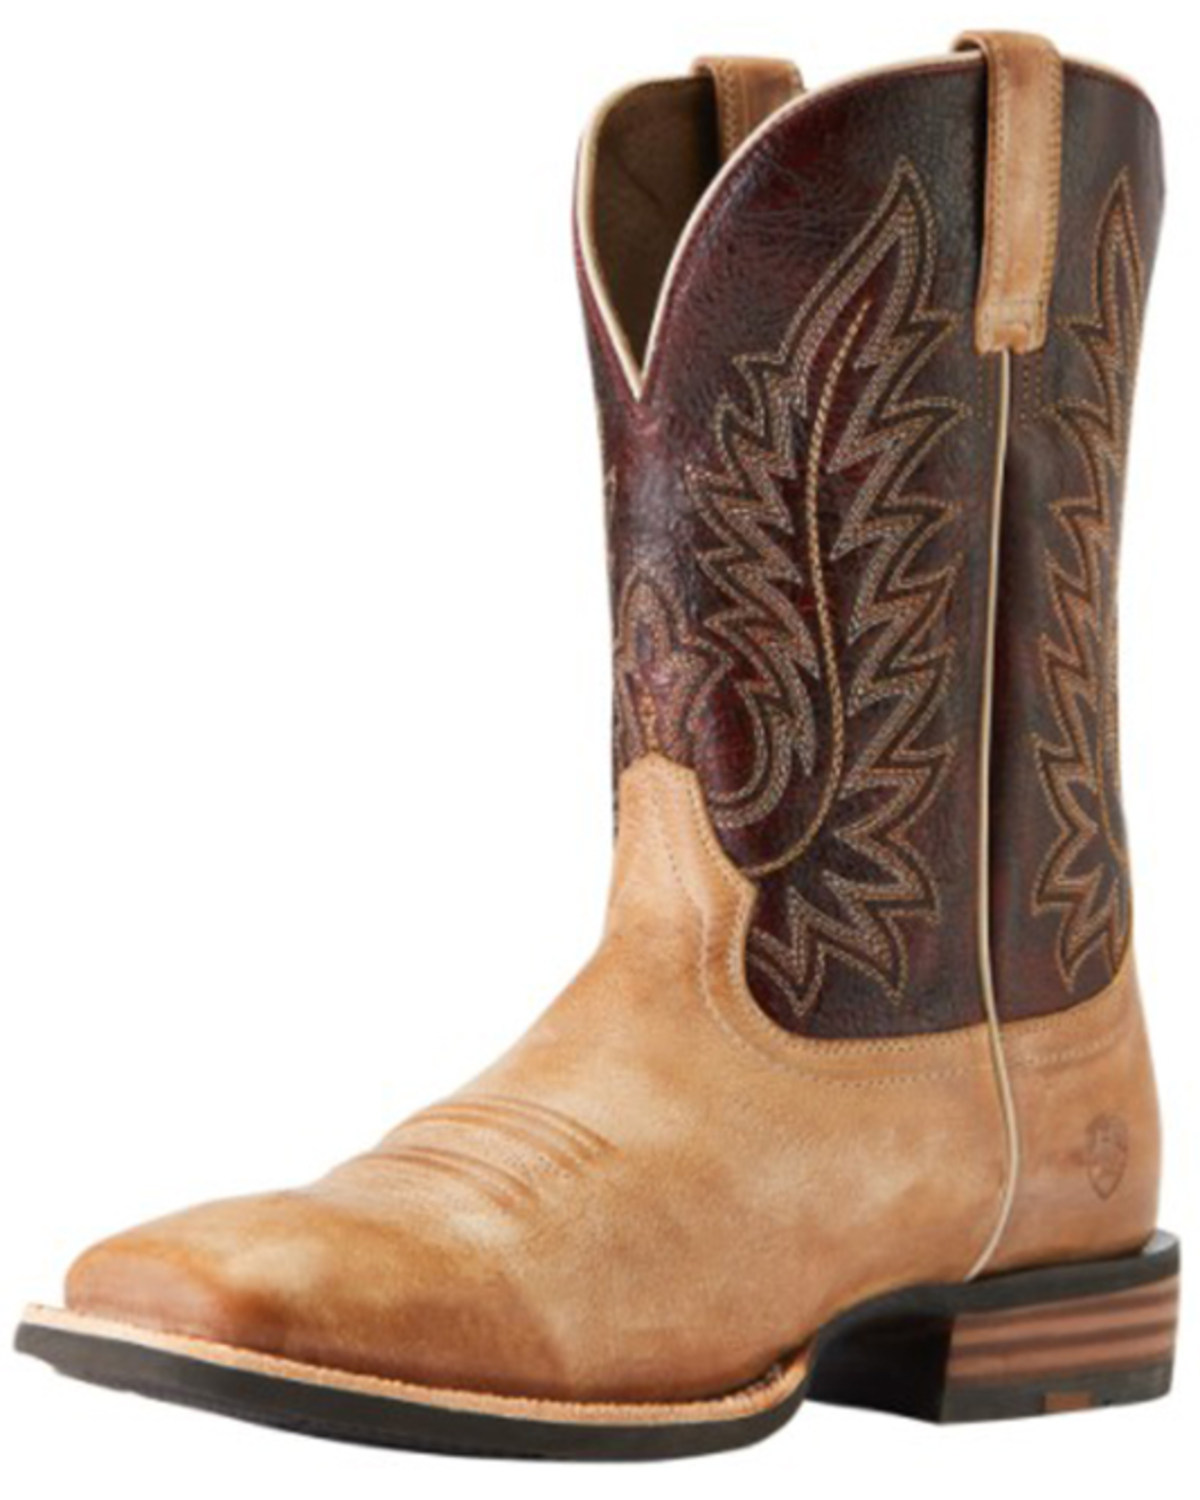 Ariat Men's Ridin High Performance Western Boots - Broad Square Toe